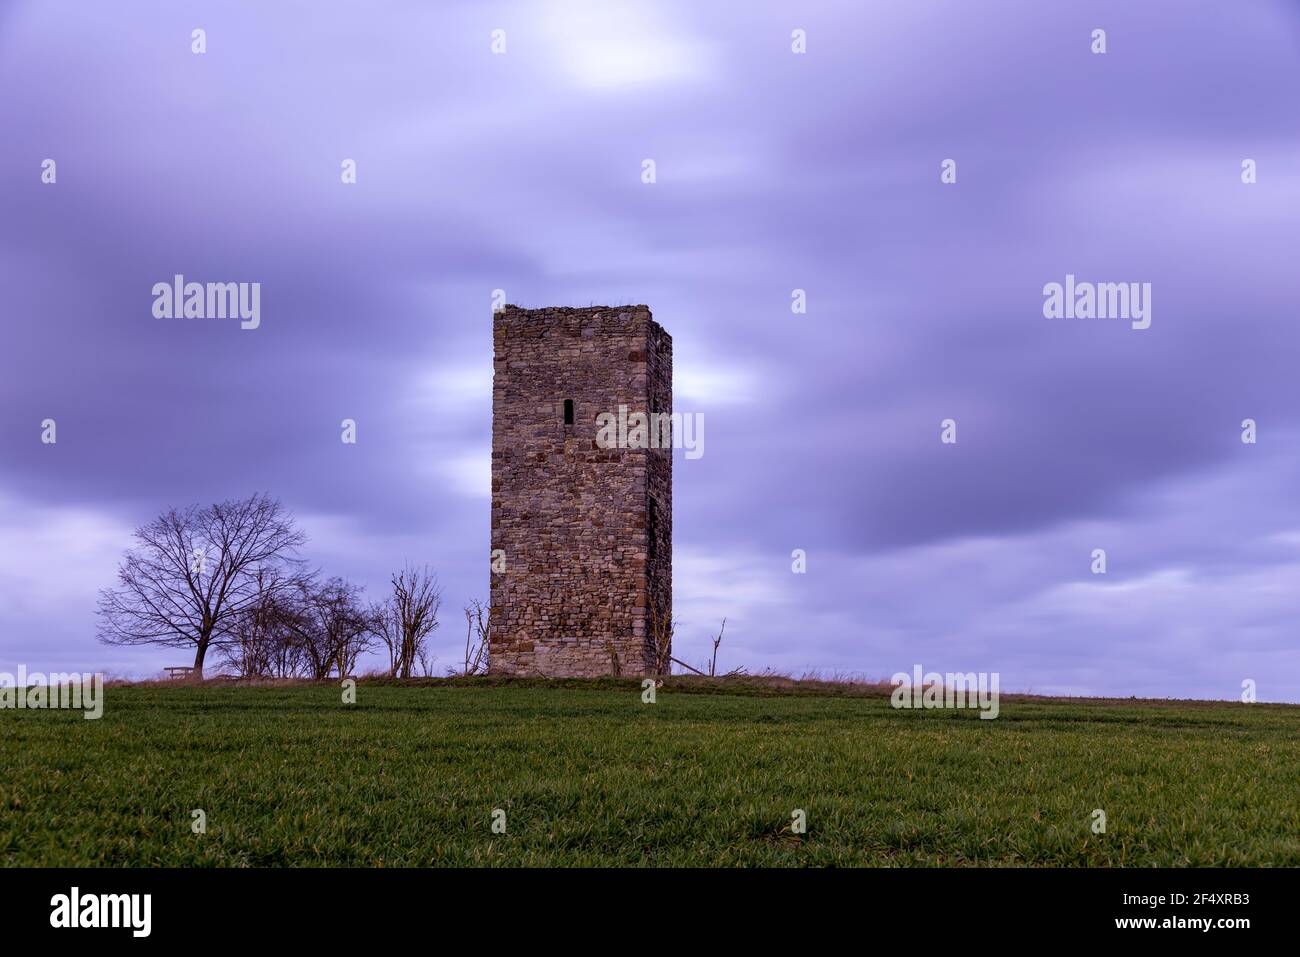 Magdeburg, Germany. 21st Mar, 2021. The 'Blaue Warte' between Wanzleben and Oschersleben is one of the oldest structures in the Magdeburger Börde. The watchtower was built of field stones in 1438 as a border marker between the areas settled by Germanic and Slavic peoples. Only two other watchtowers from this period have survived in Saxony-Anhalt. Credit: Stephan Schulz/dpa-Zentralbild/ZB/dpa/Alamy Live News Stock Photo